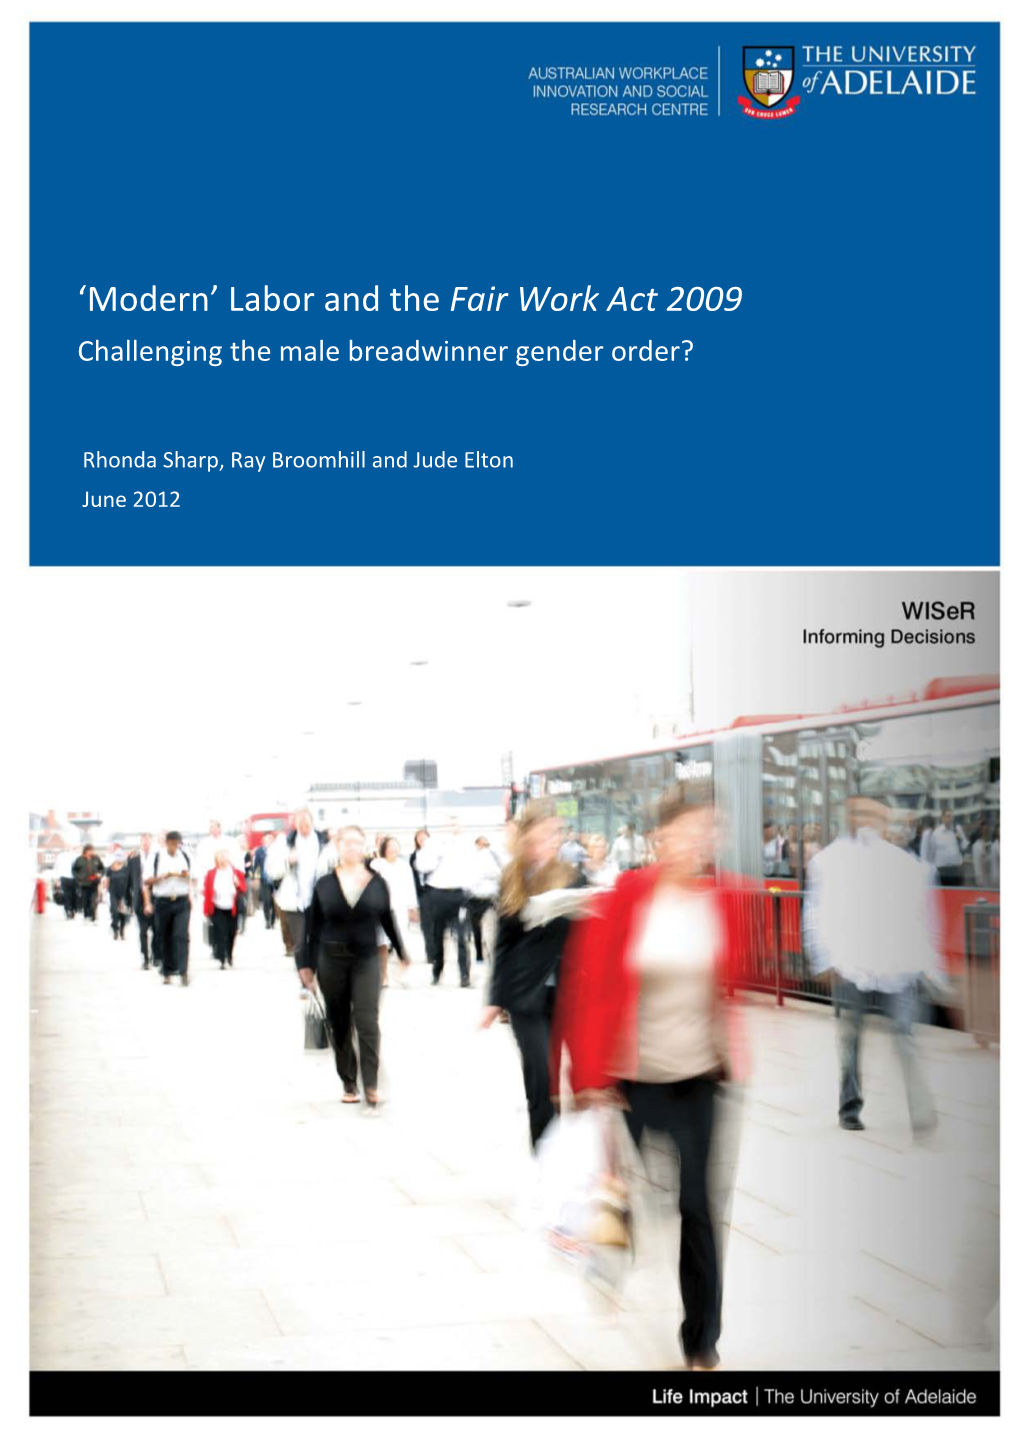 'Modern' Labor and the Fair Work Act 2009